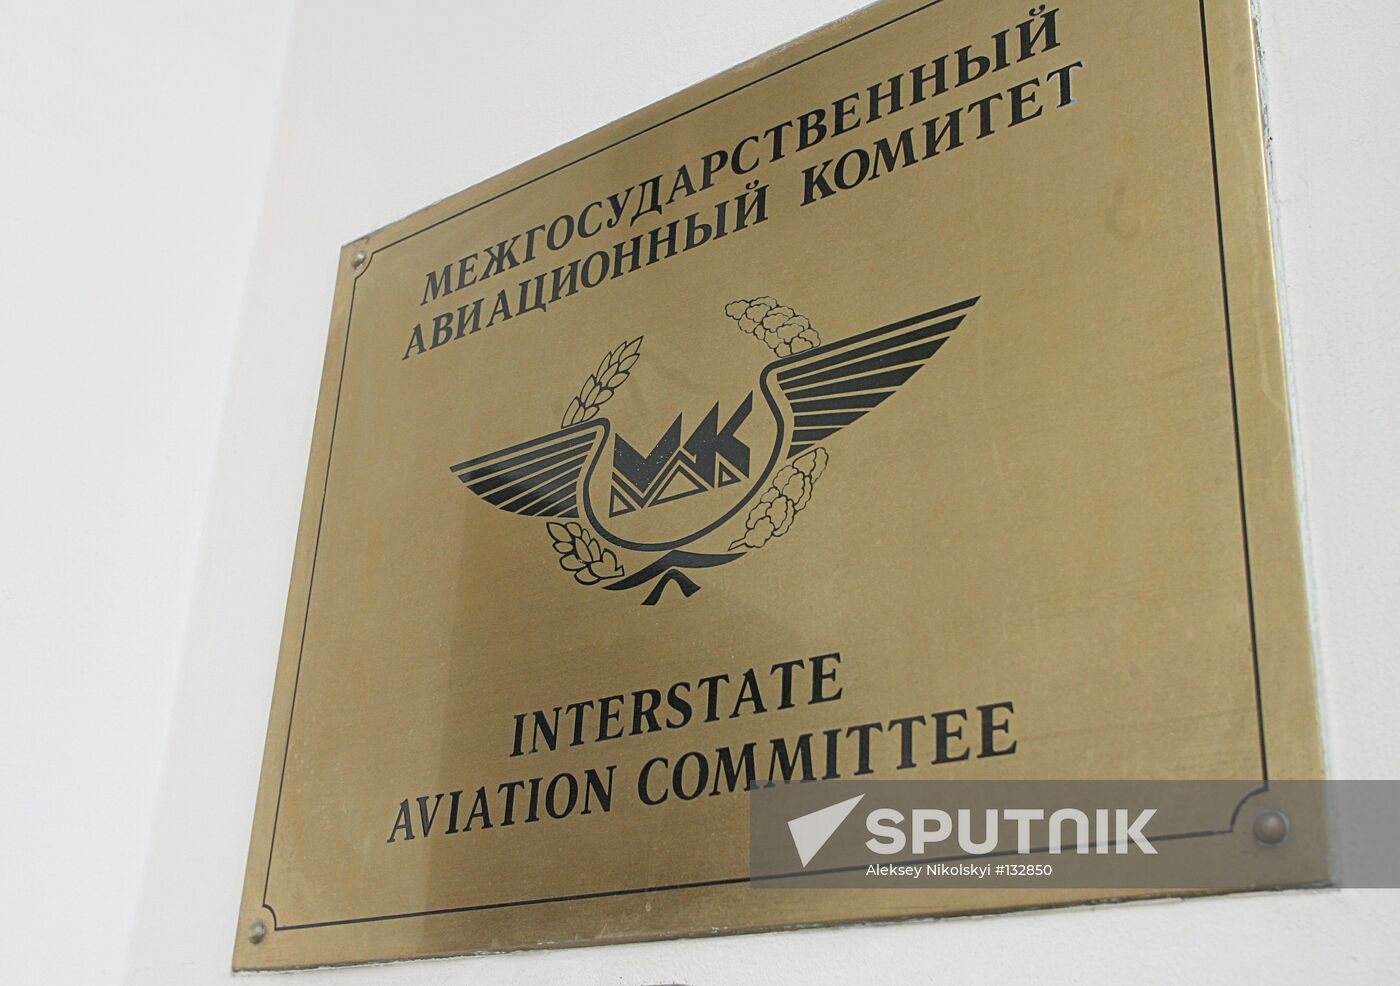 INTER-STATE AVIATION COMMITTEE